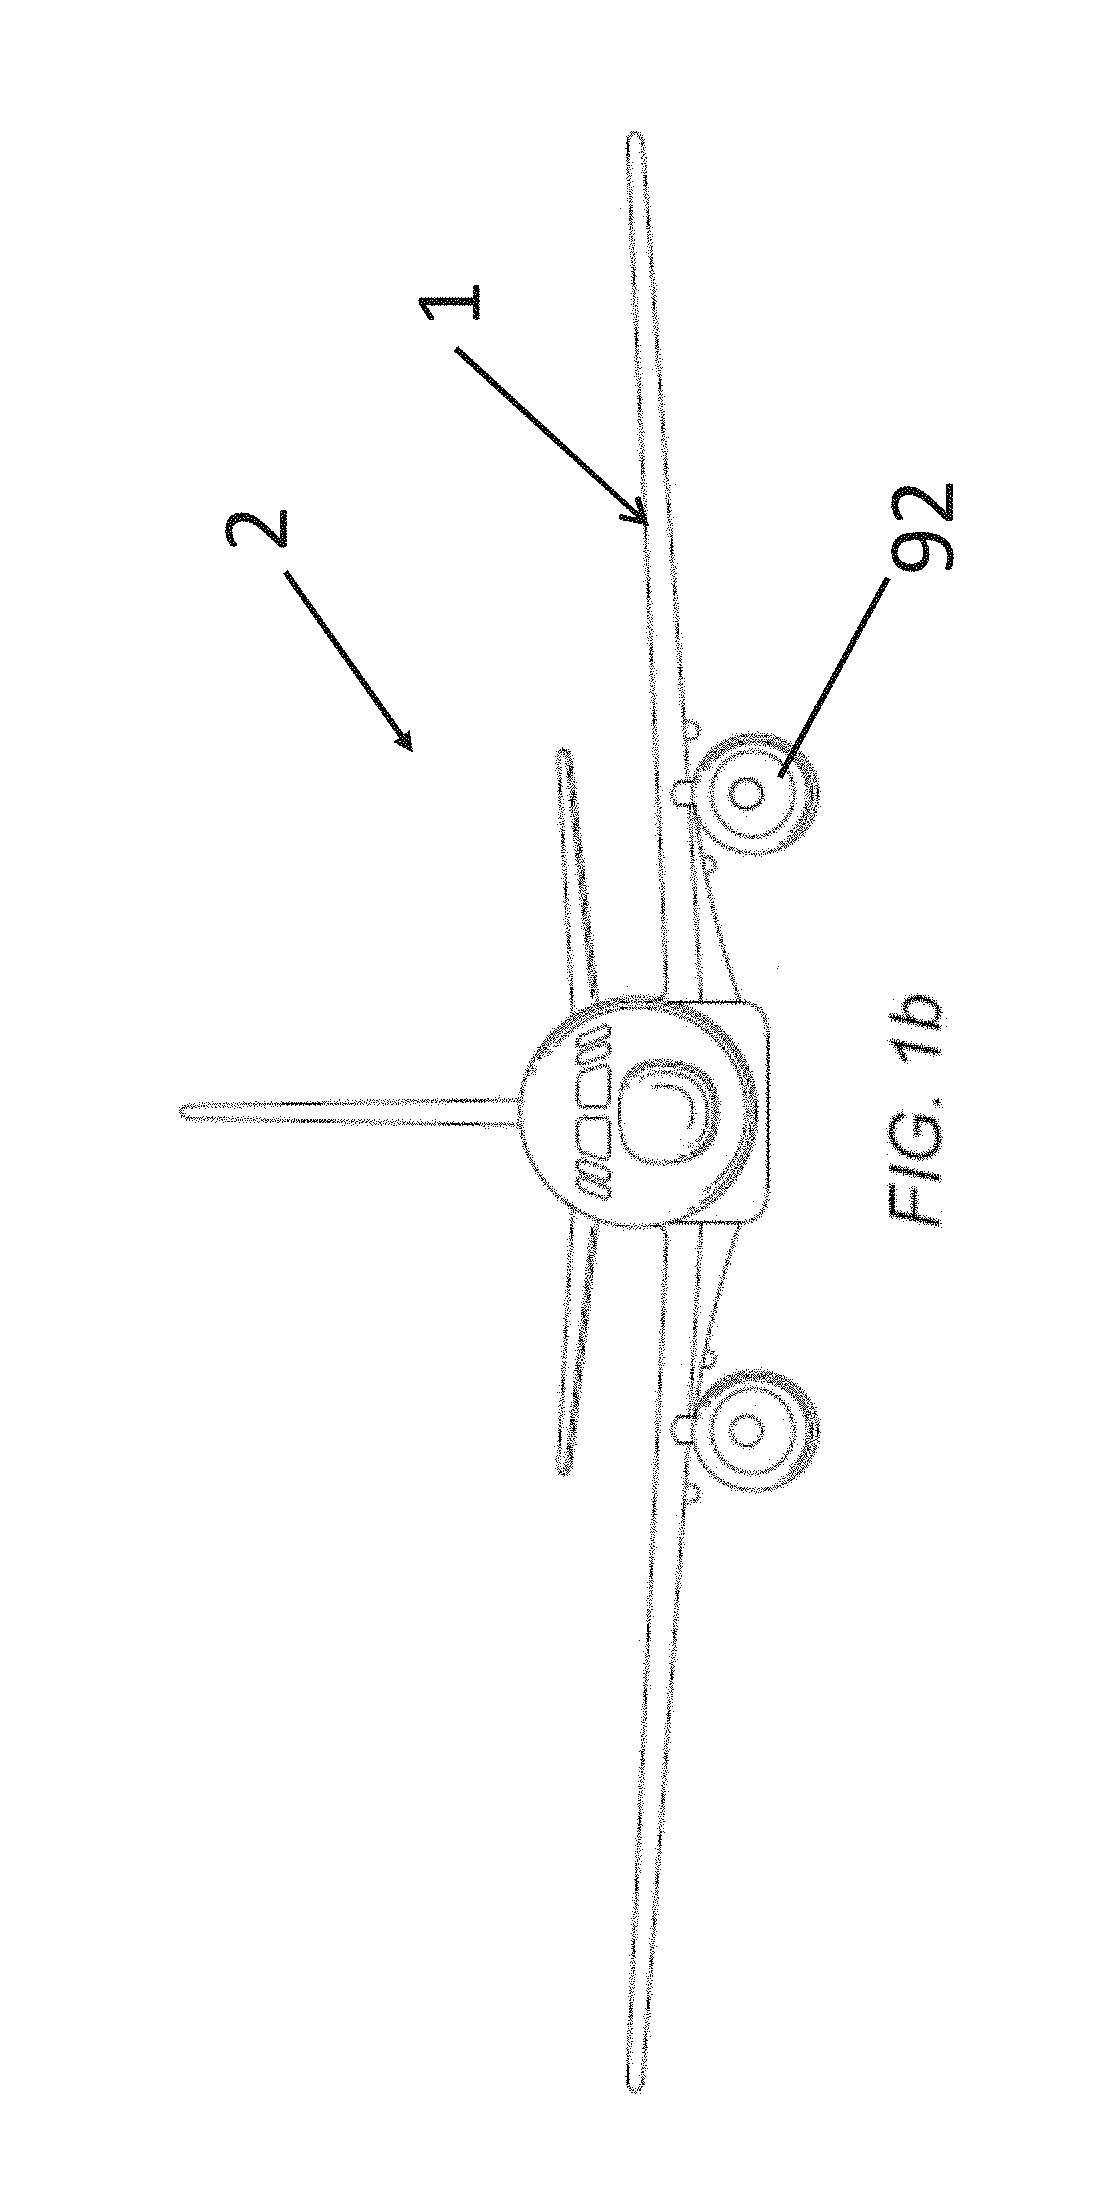 Rotational joint for an aircraft folding wing and method of assembly